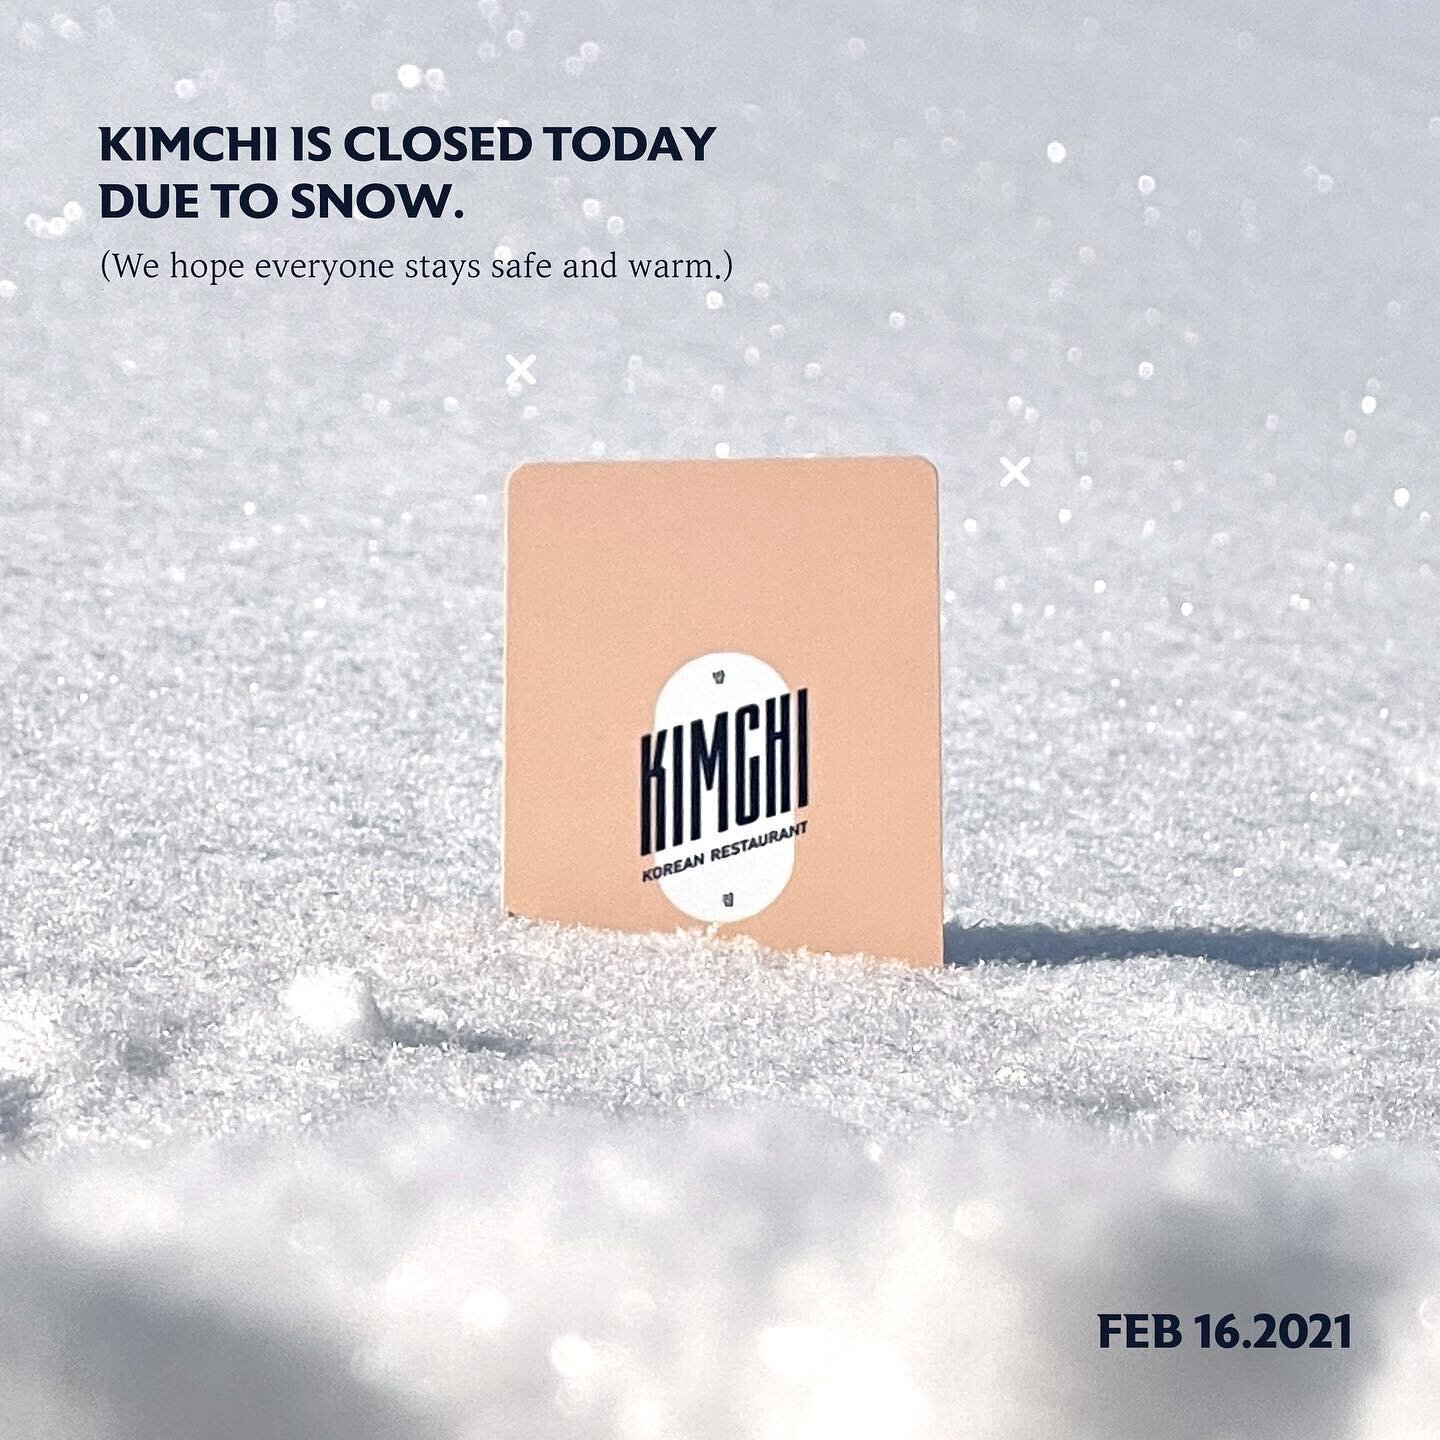 ❄️ KIMCHI will be closed today due to snow! ❄️ 
#snowday